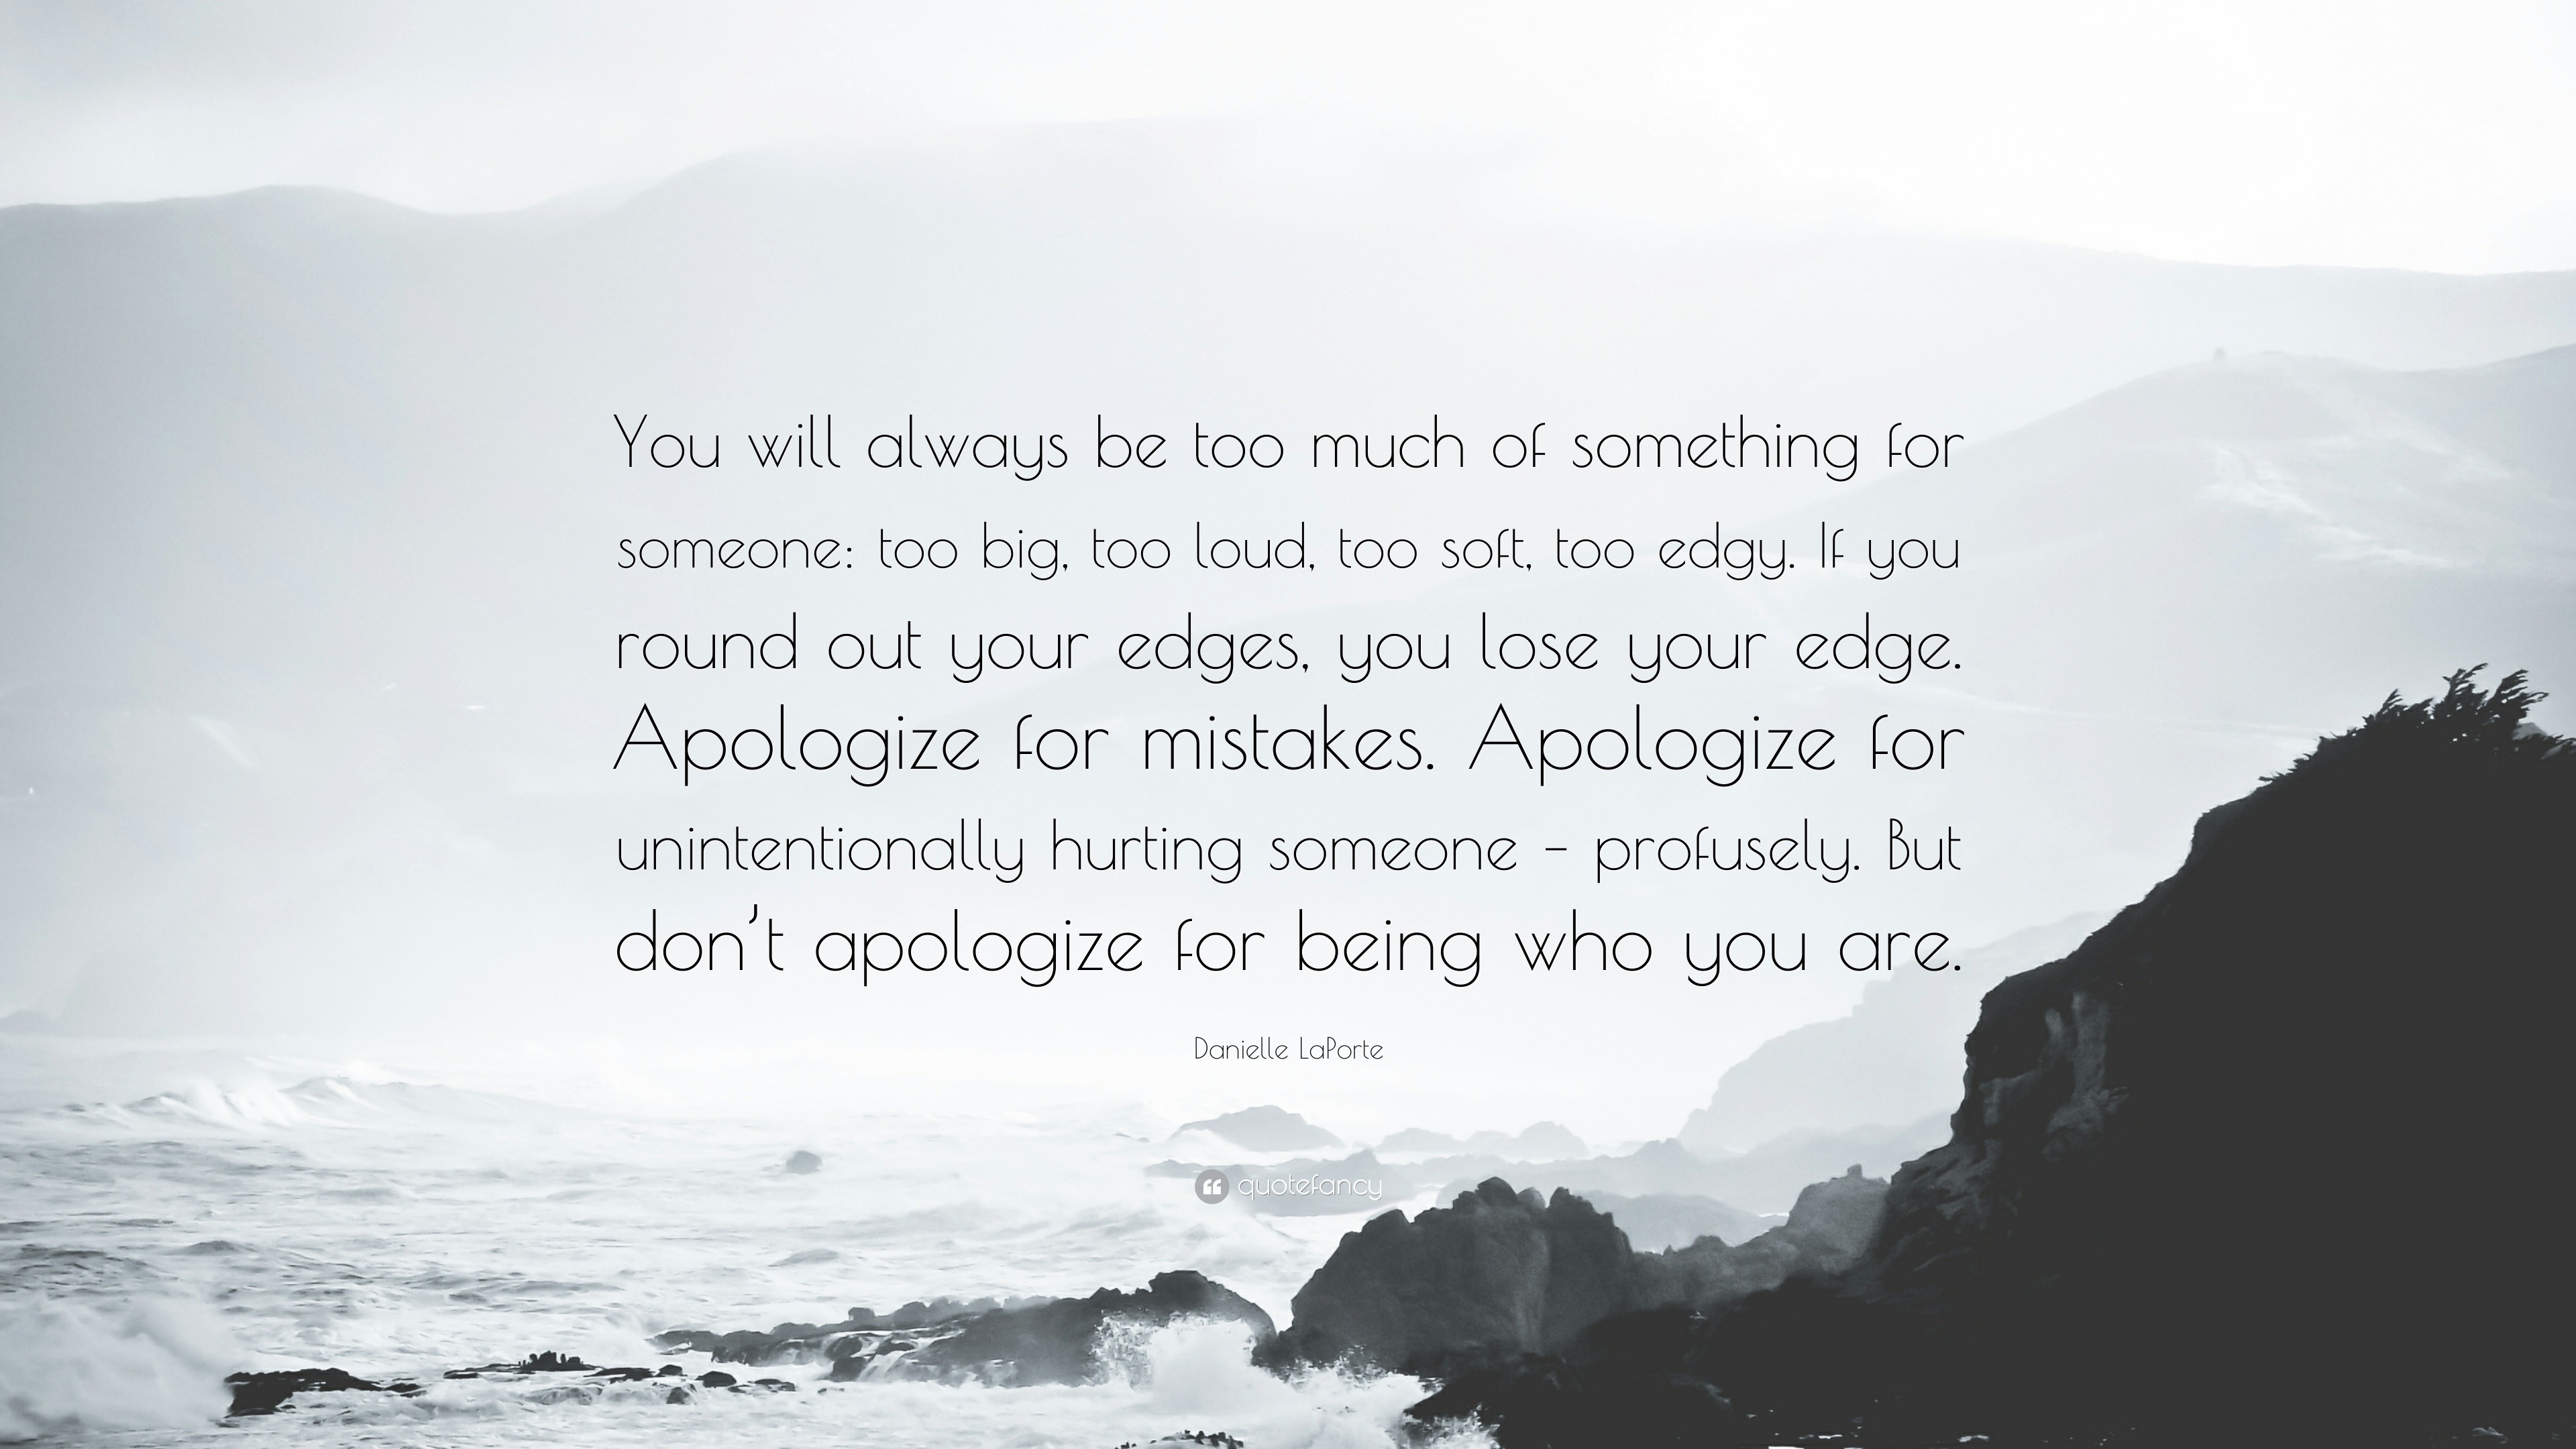 Danielle LaPorte Quote: “You will always be too much of something